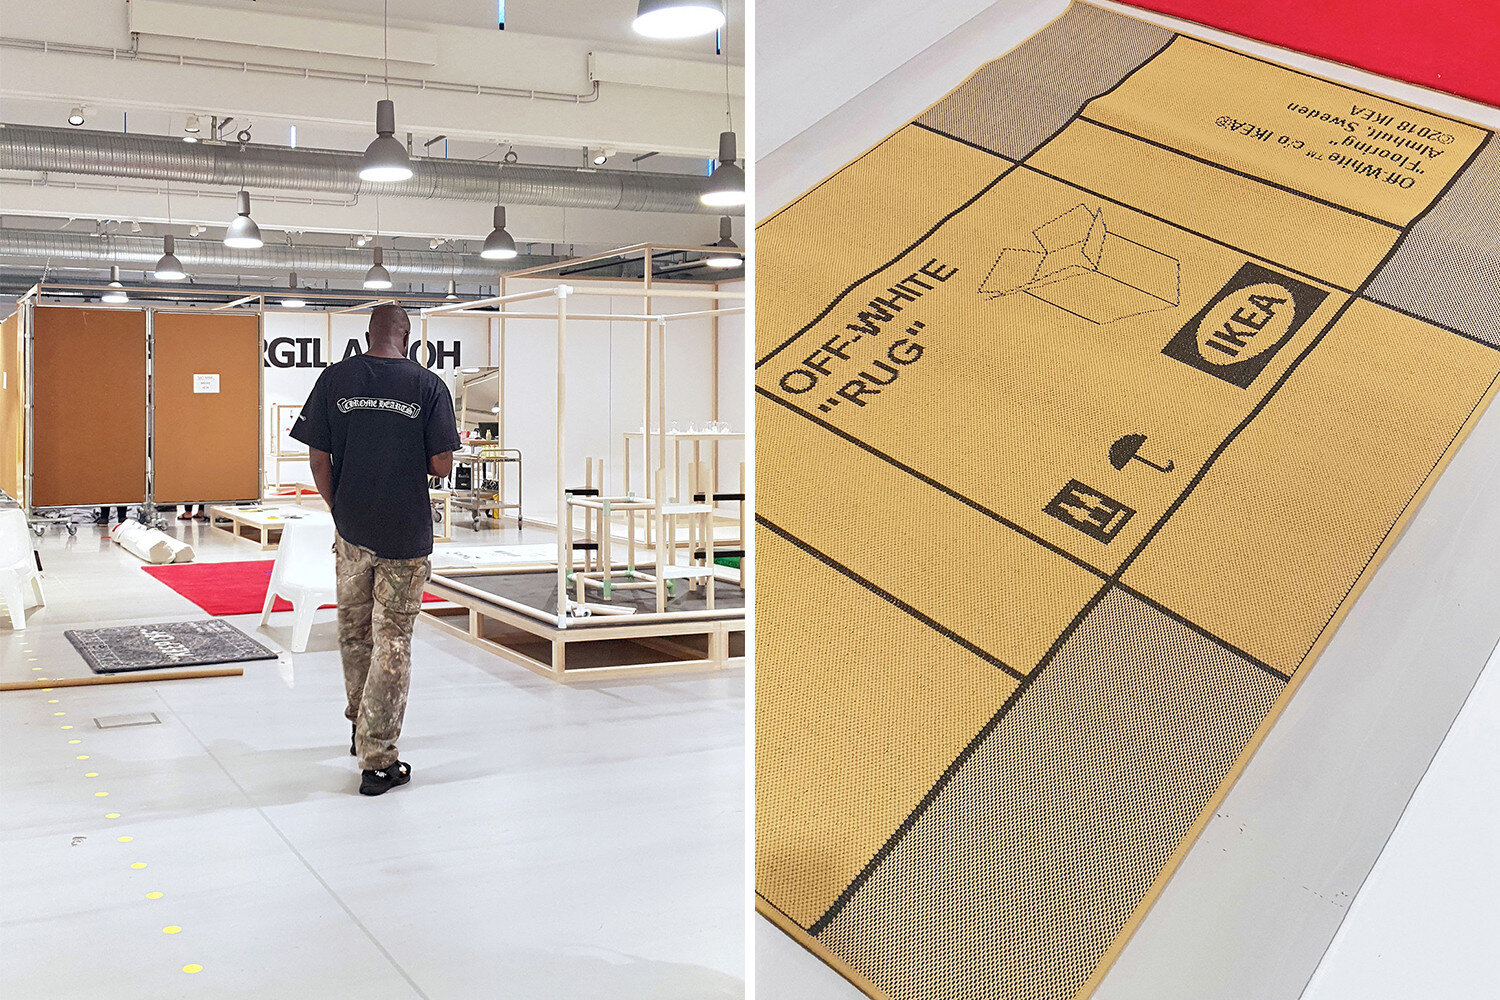 Designer Virgil Abloh Talks About His Latest Collaboration With Ikea